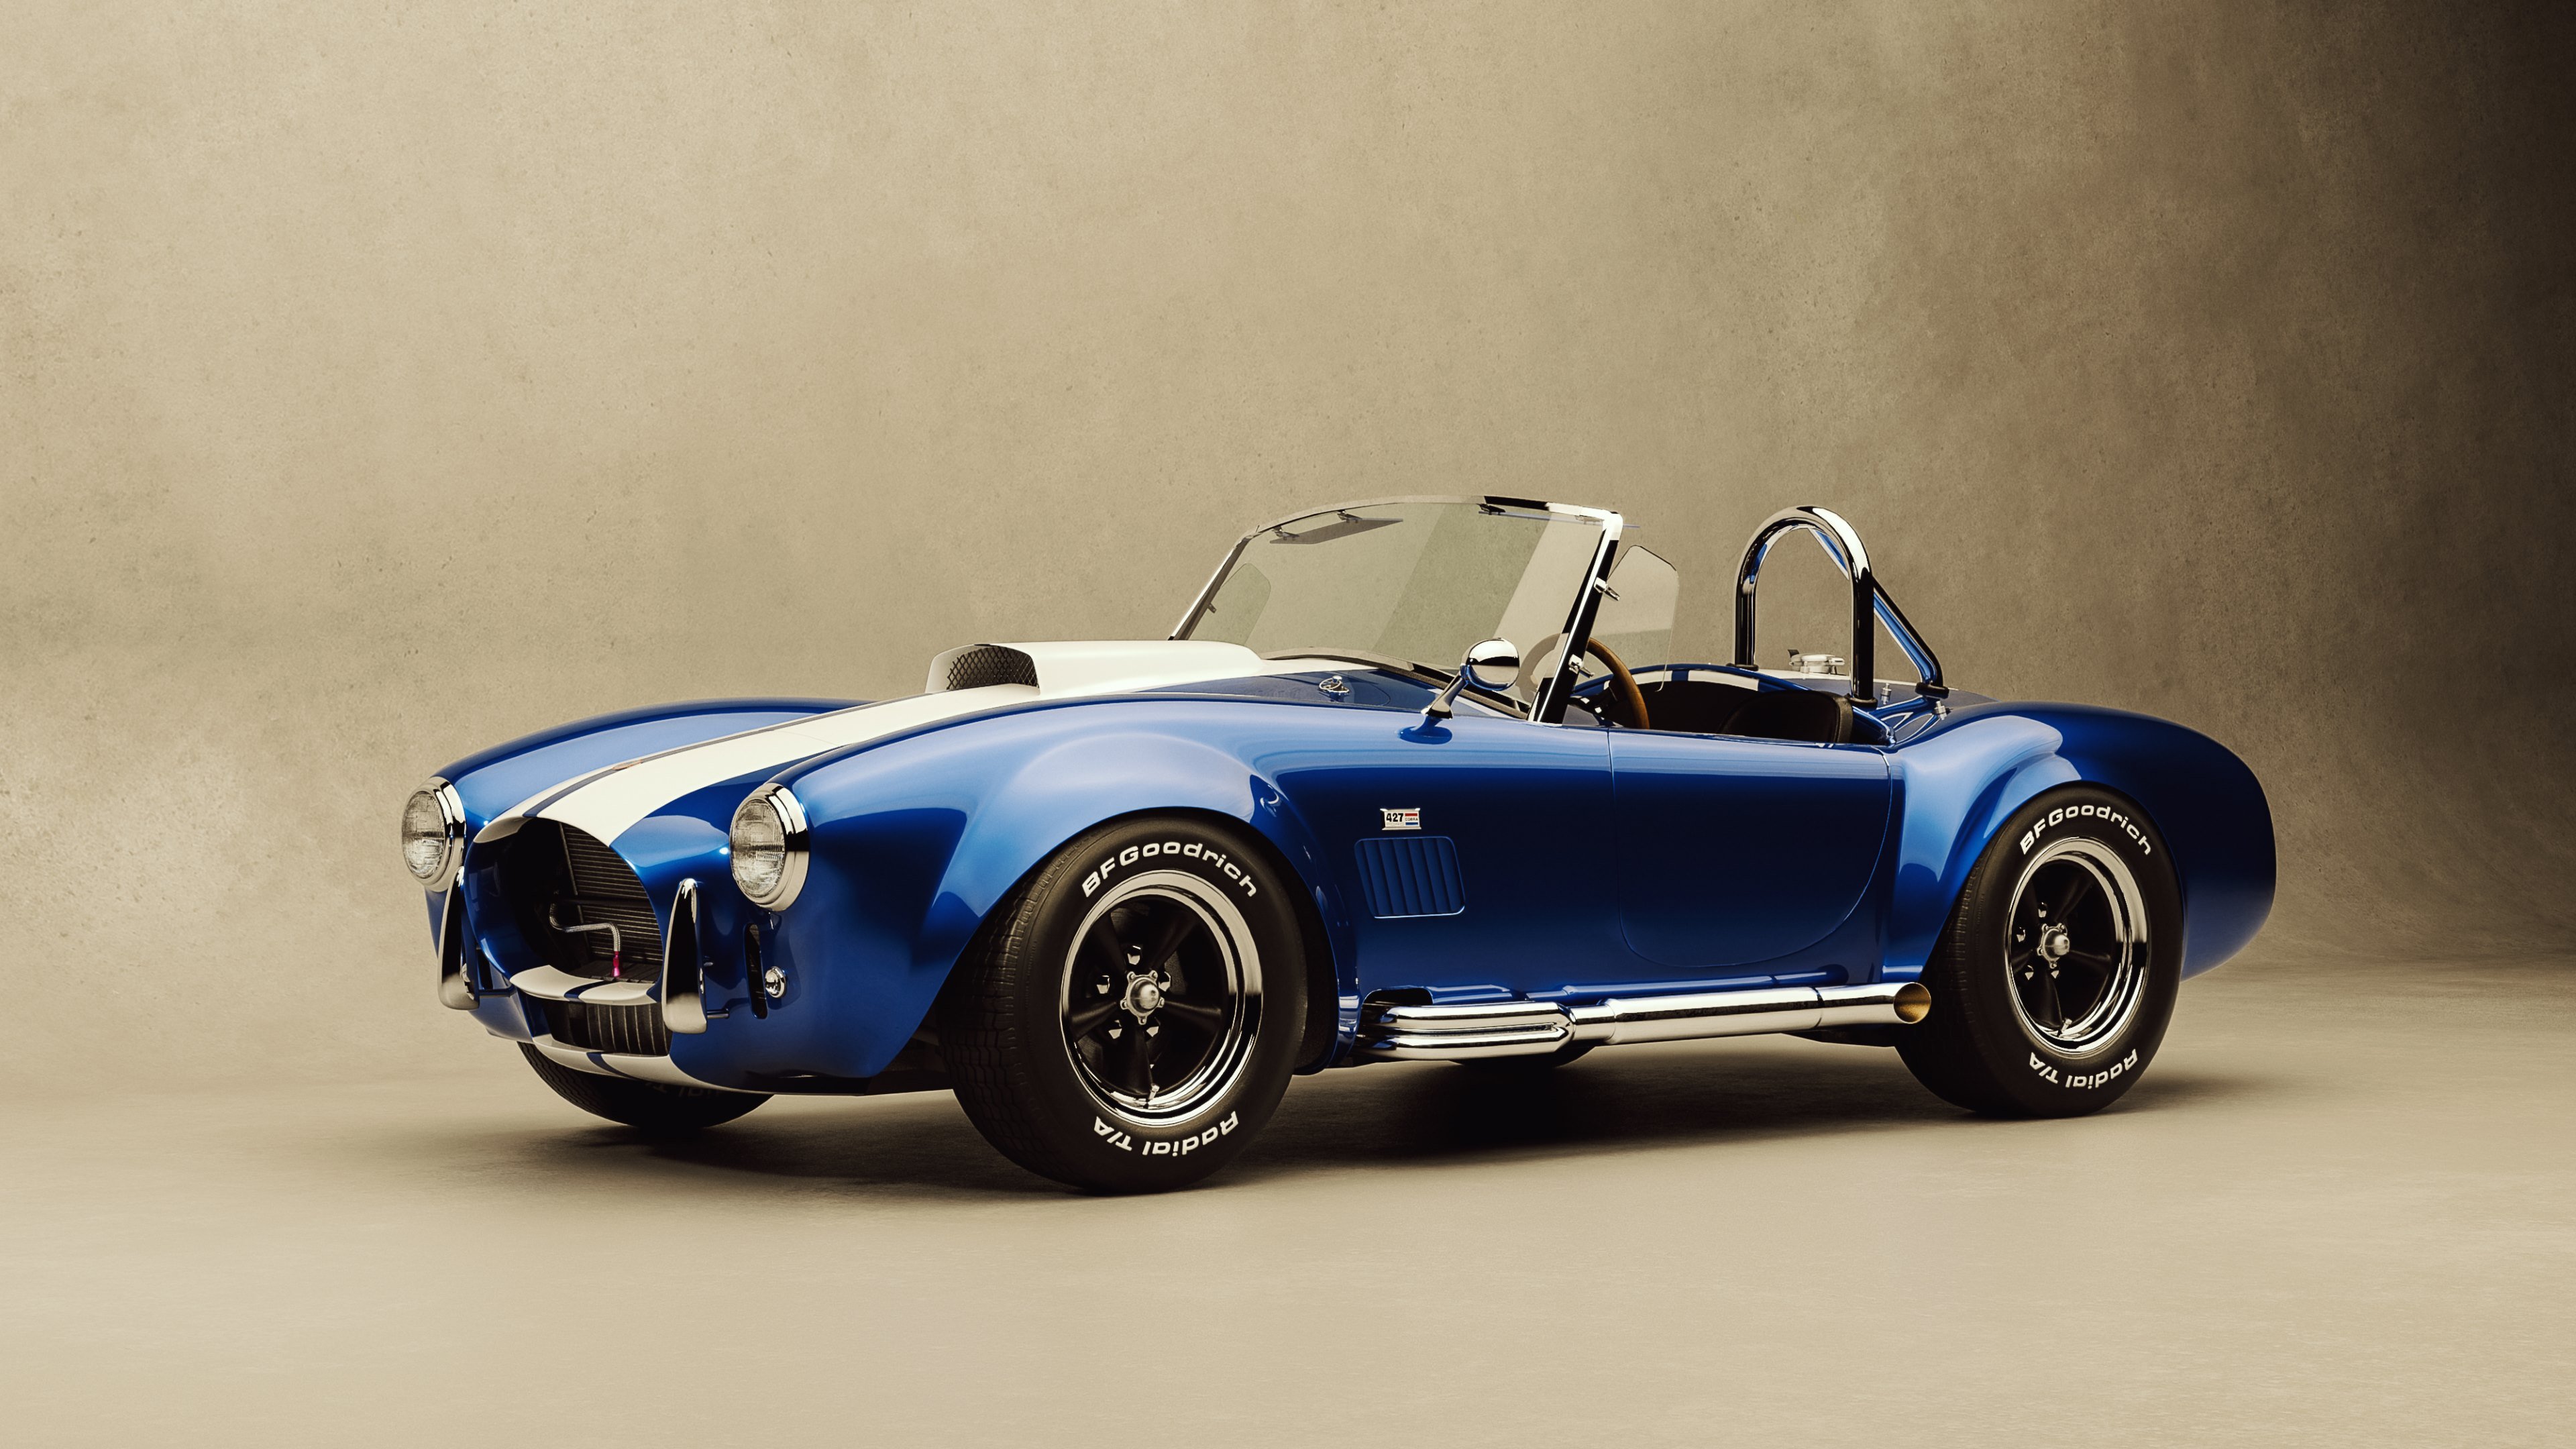  Car Vintage Ford Shelby Cobra 427 HD Wallpapers 4K Wallpapers